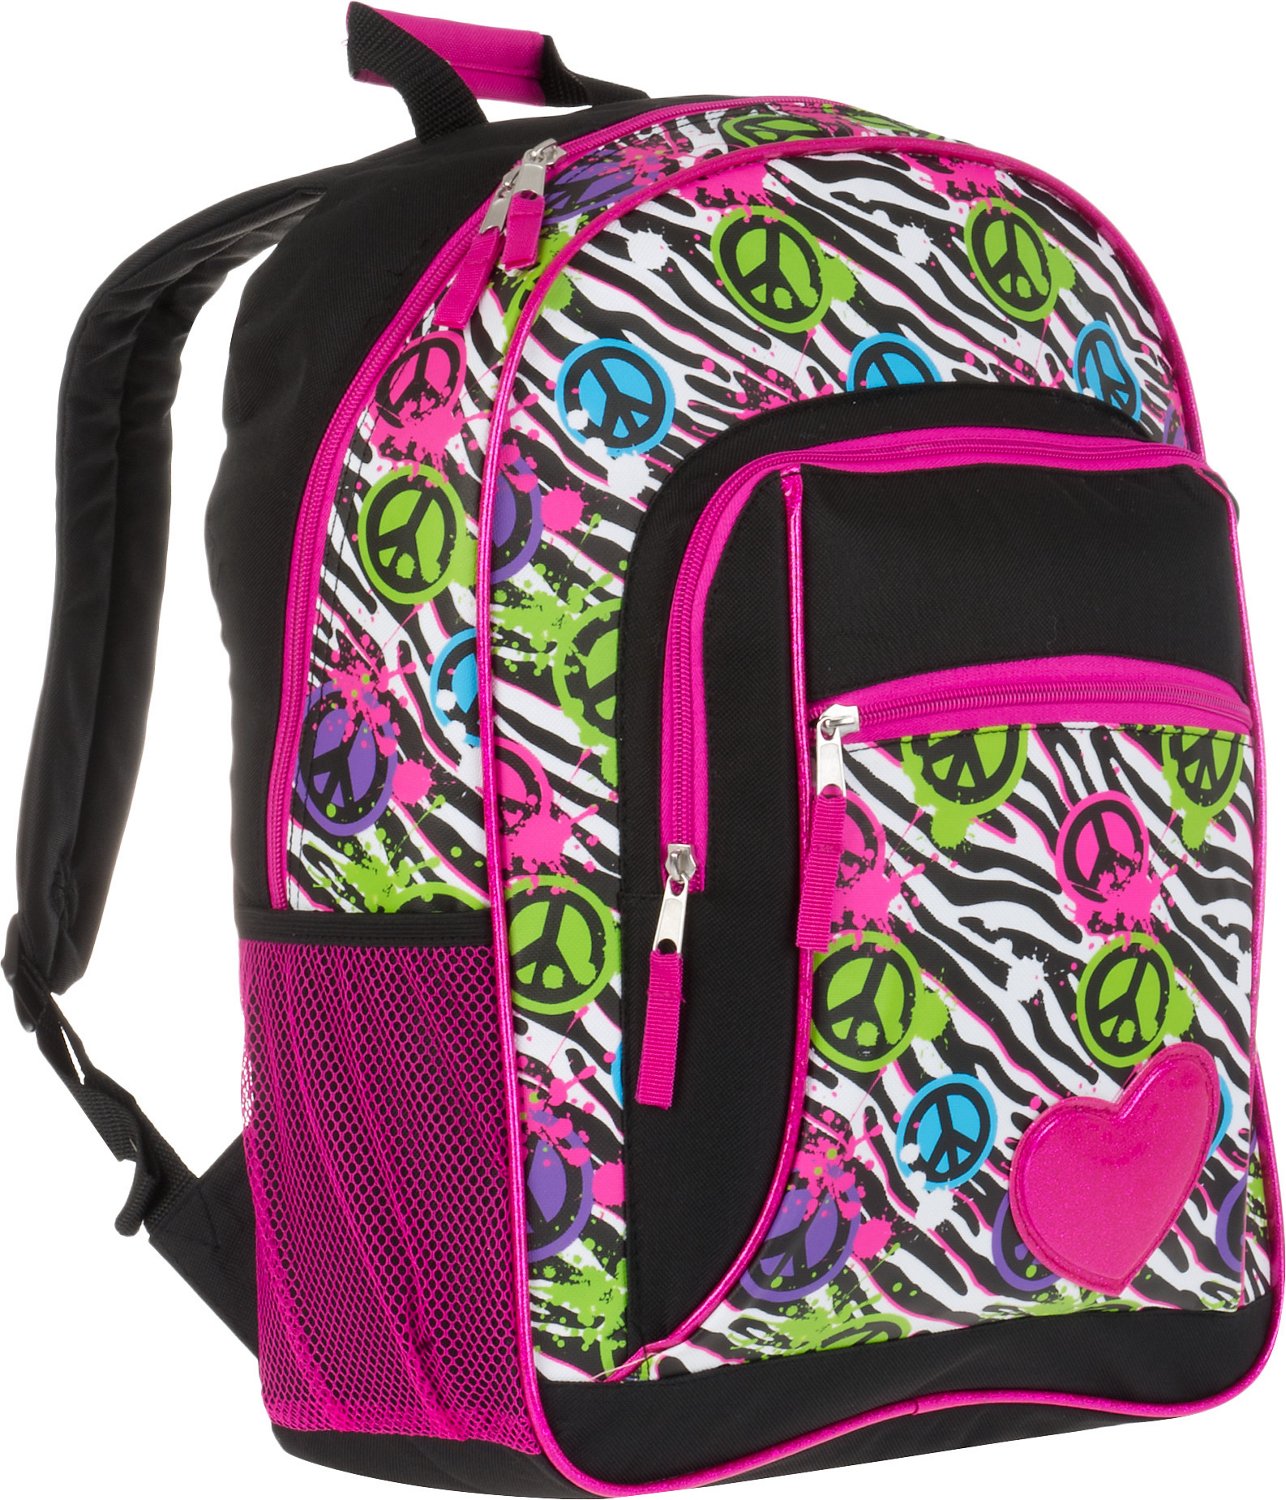 Accessories 22 Girls' Aly & Ava Combo Backpack